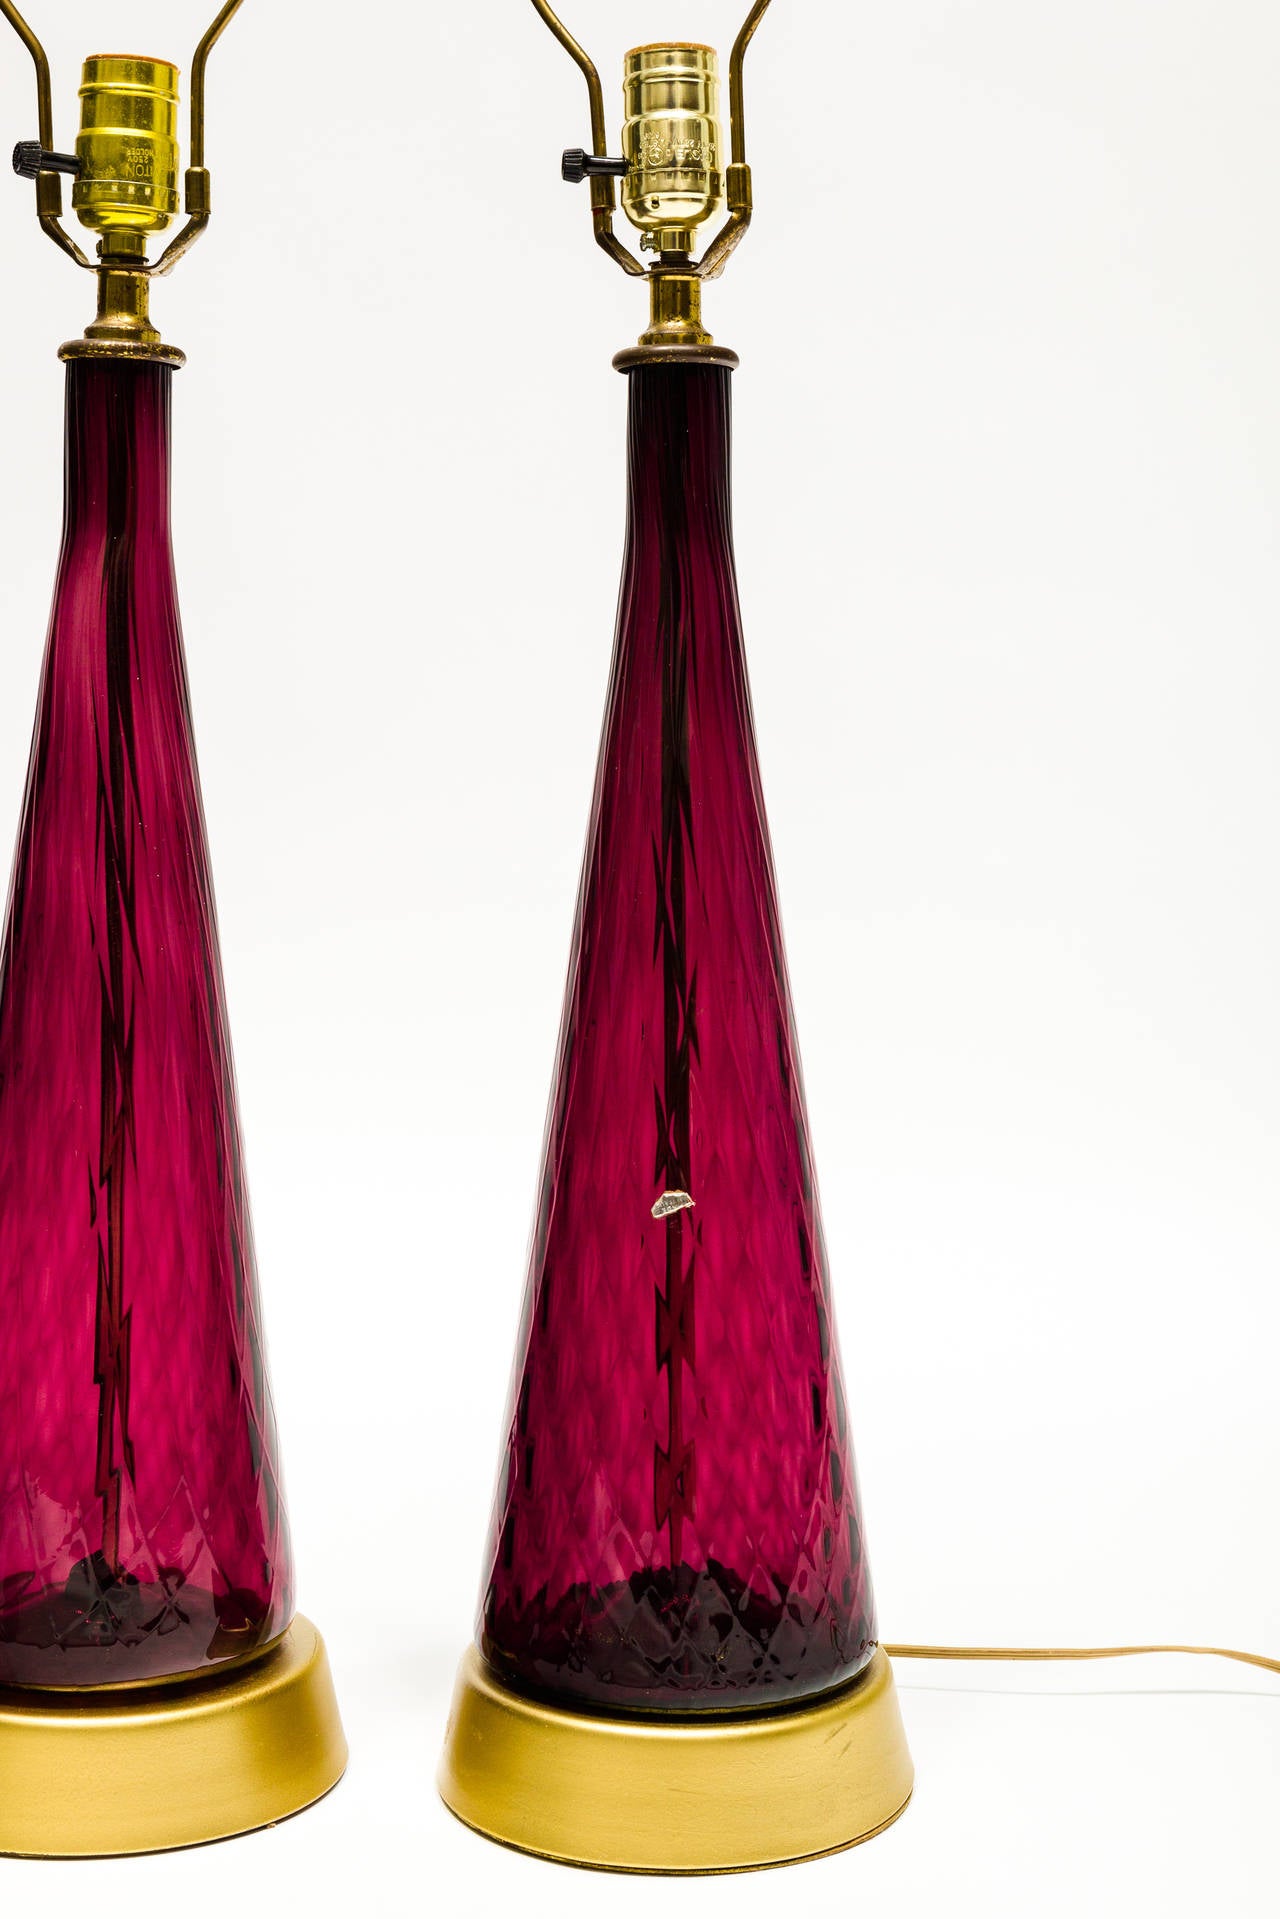 Pair of Murano glass table lamps. They have a diamond shaped pattern and partial label of 